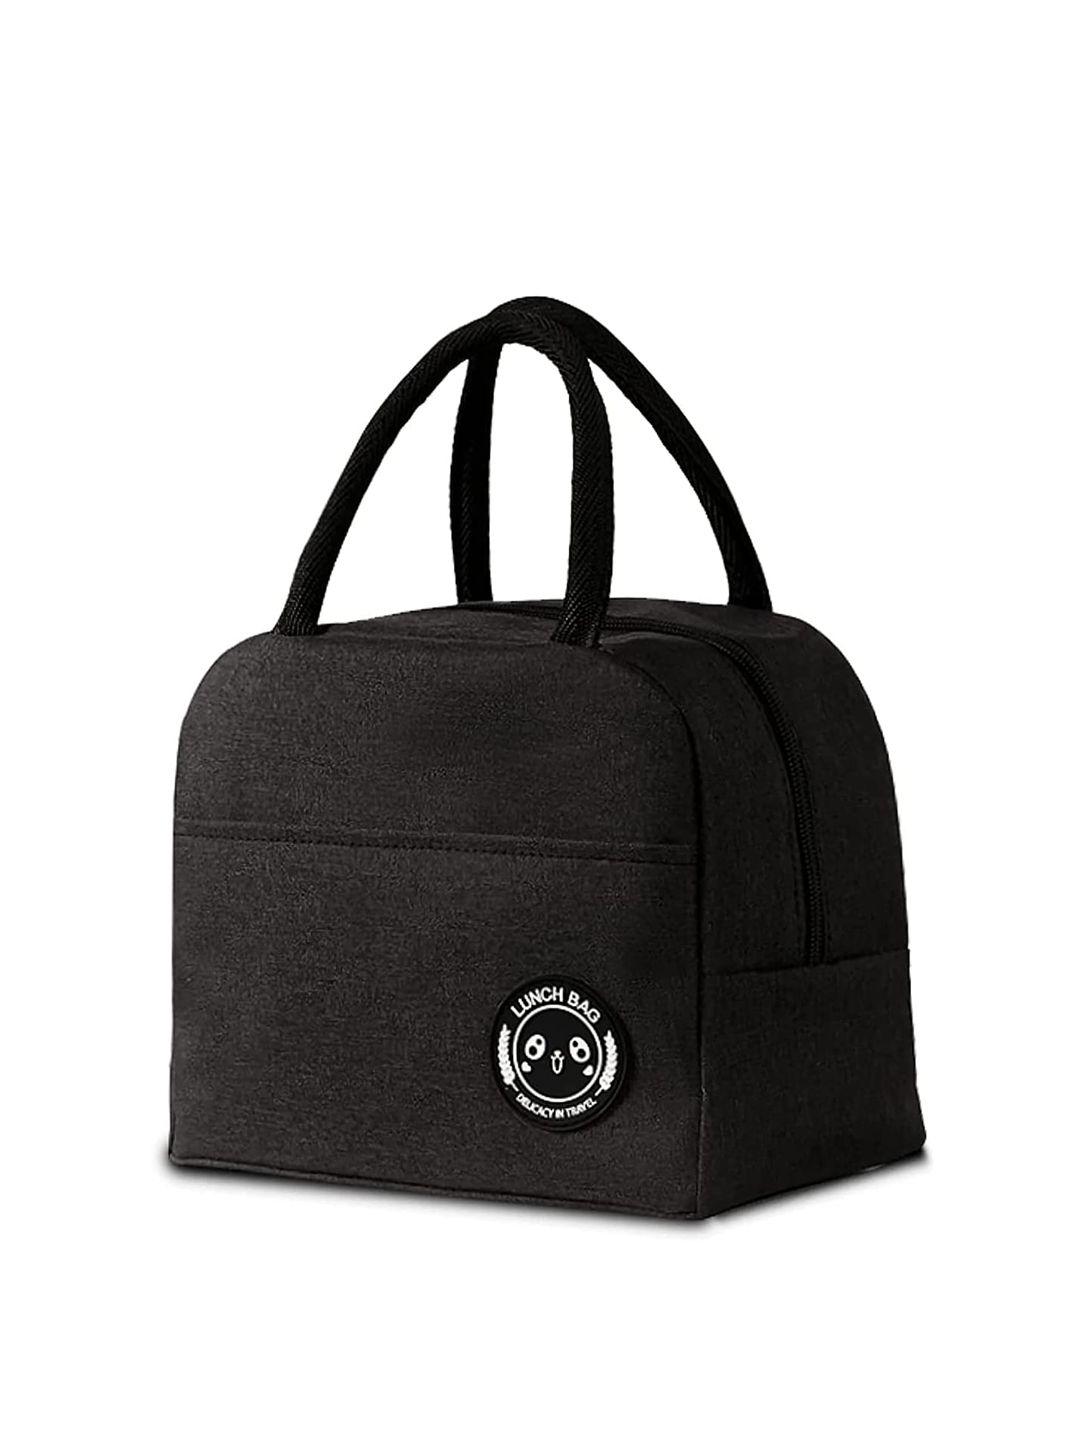 house of quirk black small insulated lunch bag